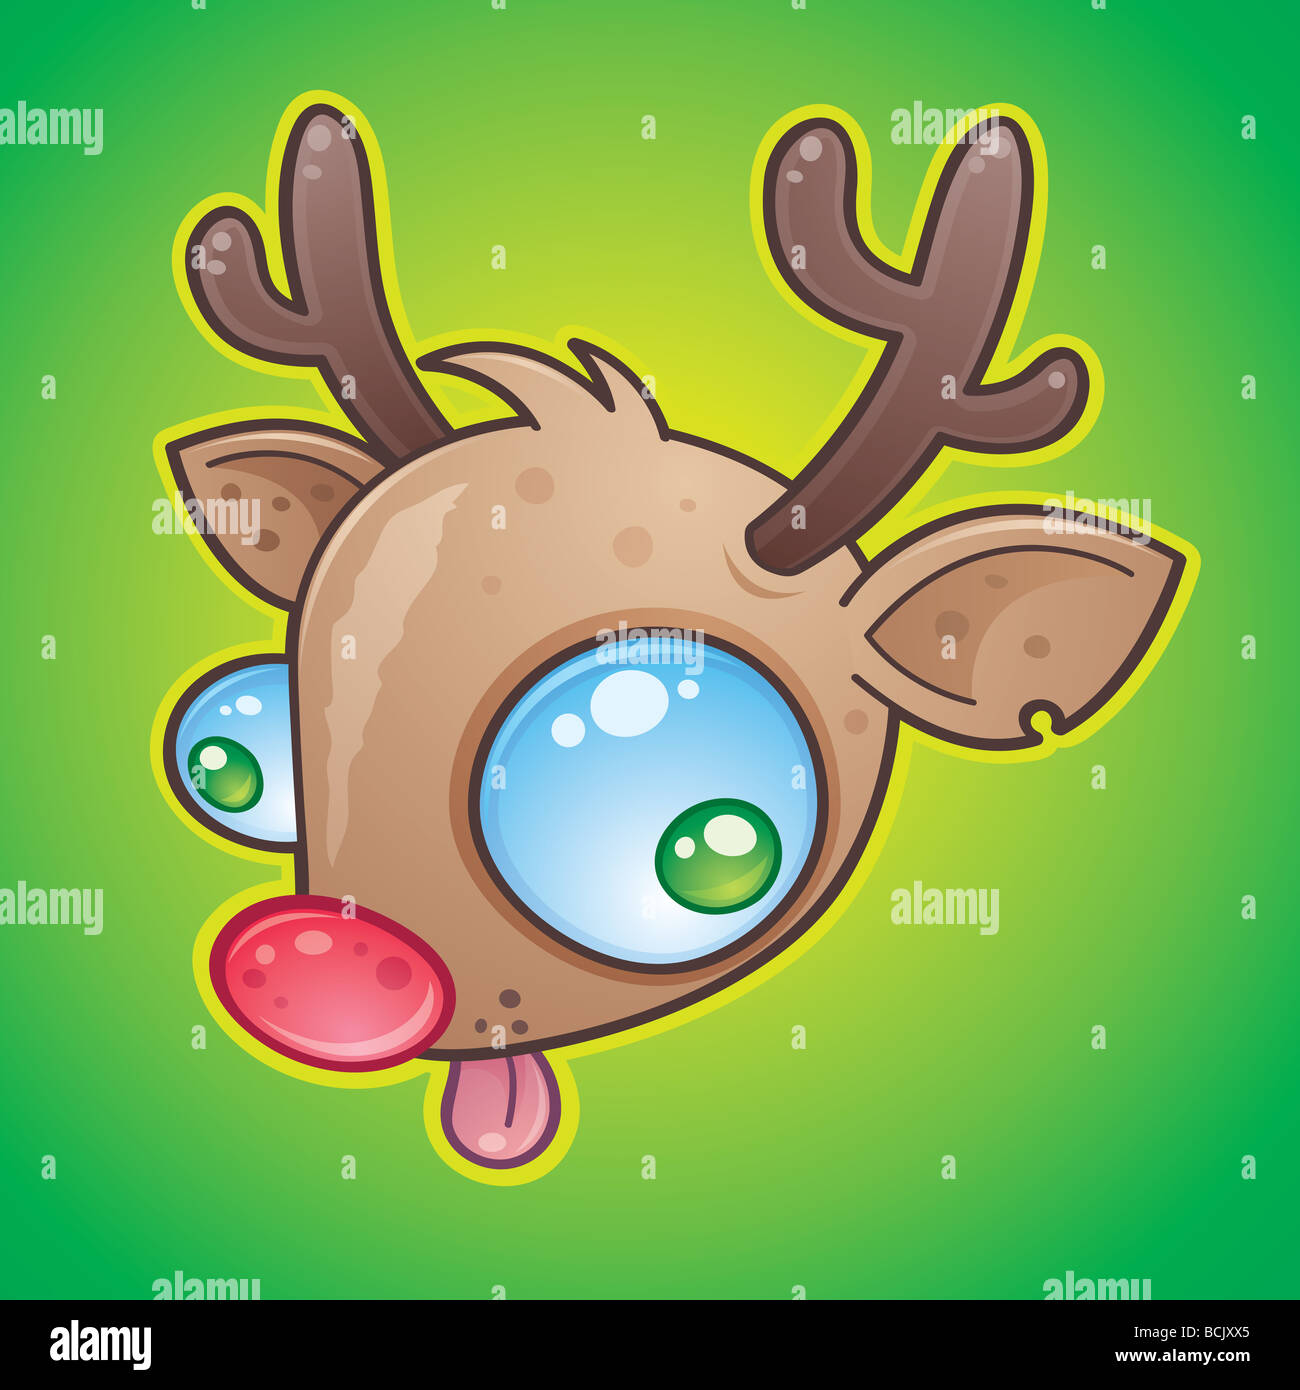 Wacky Rudolph The Red Nosed Reindeer face with bulging eyes sticking out his tongue. drawn in a humorous cartoon style. Stock Photo